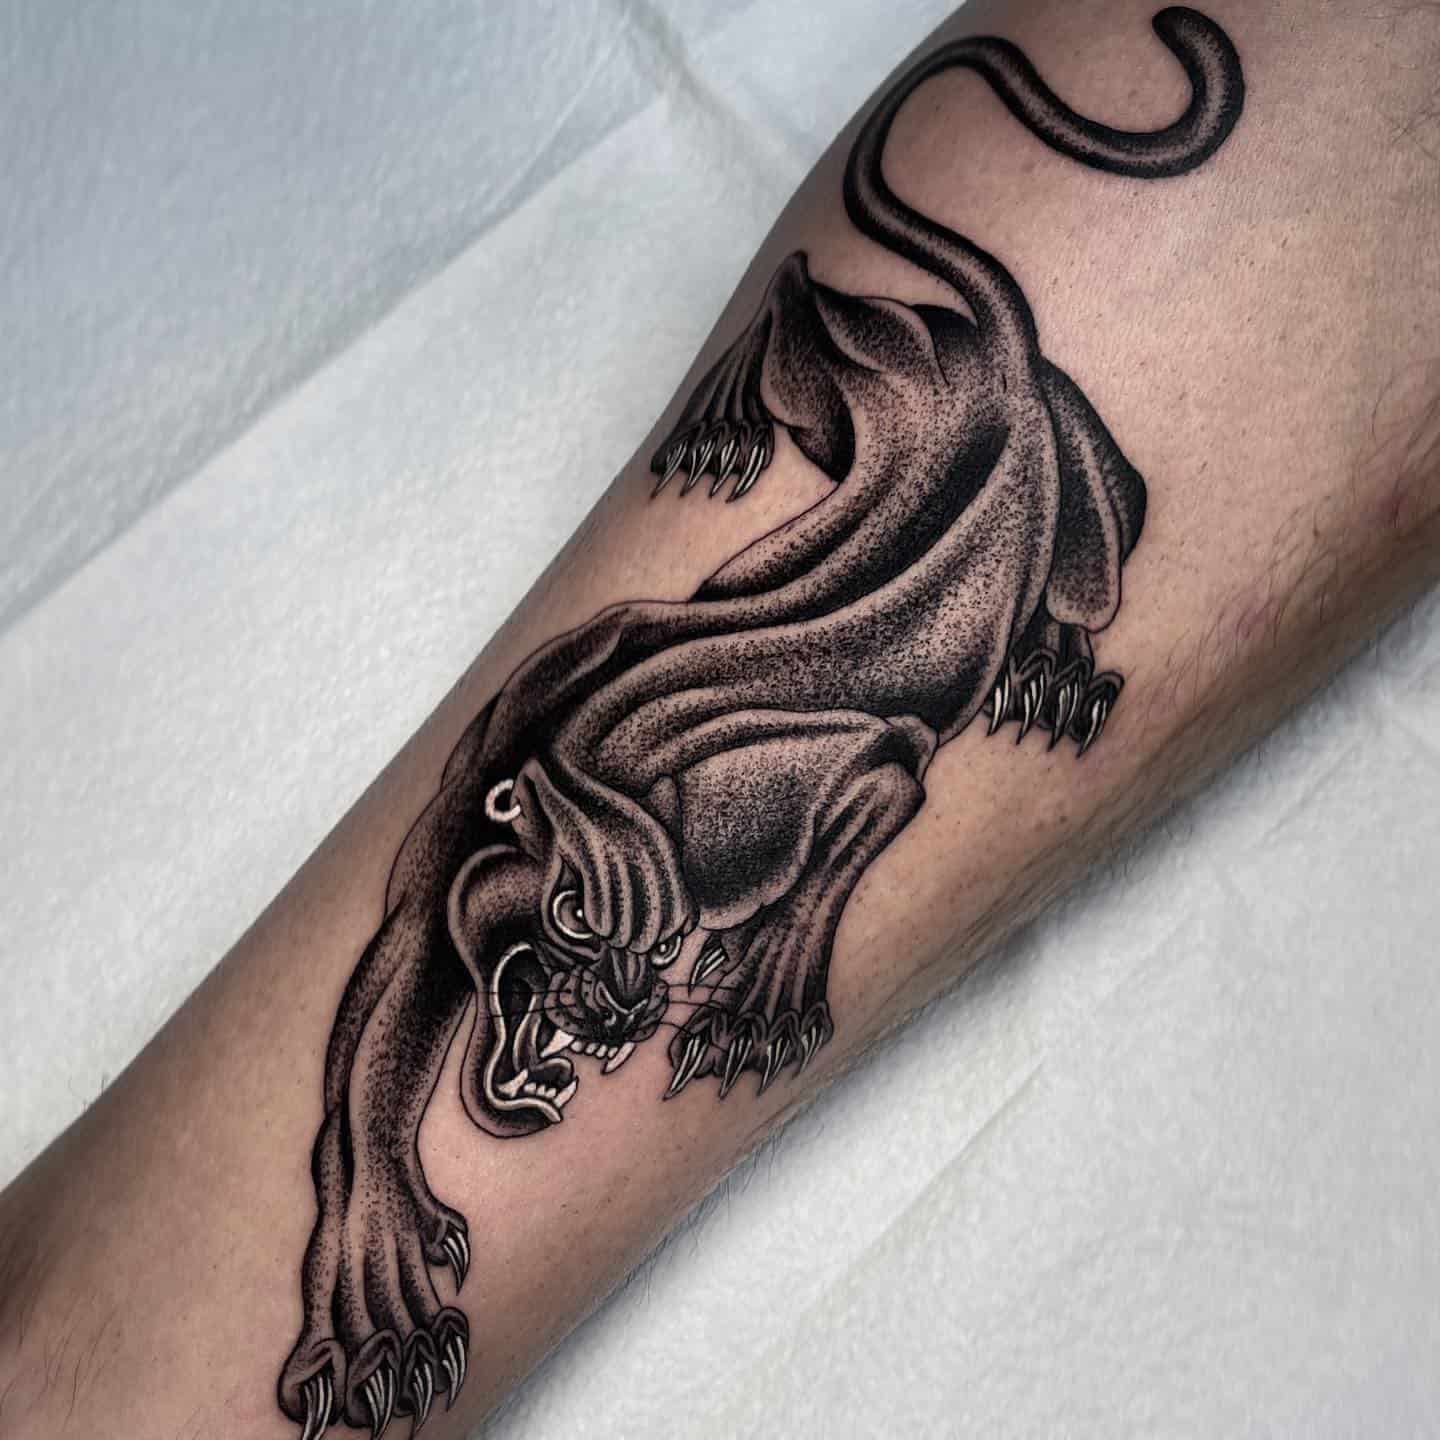 Panther Tattoo Ideas 7